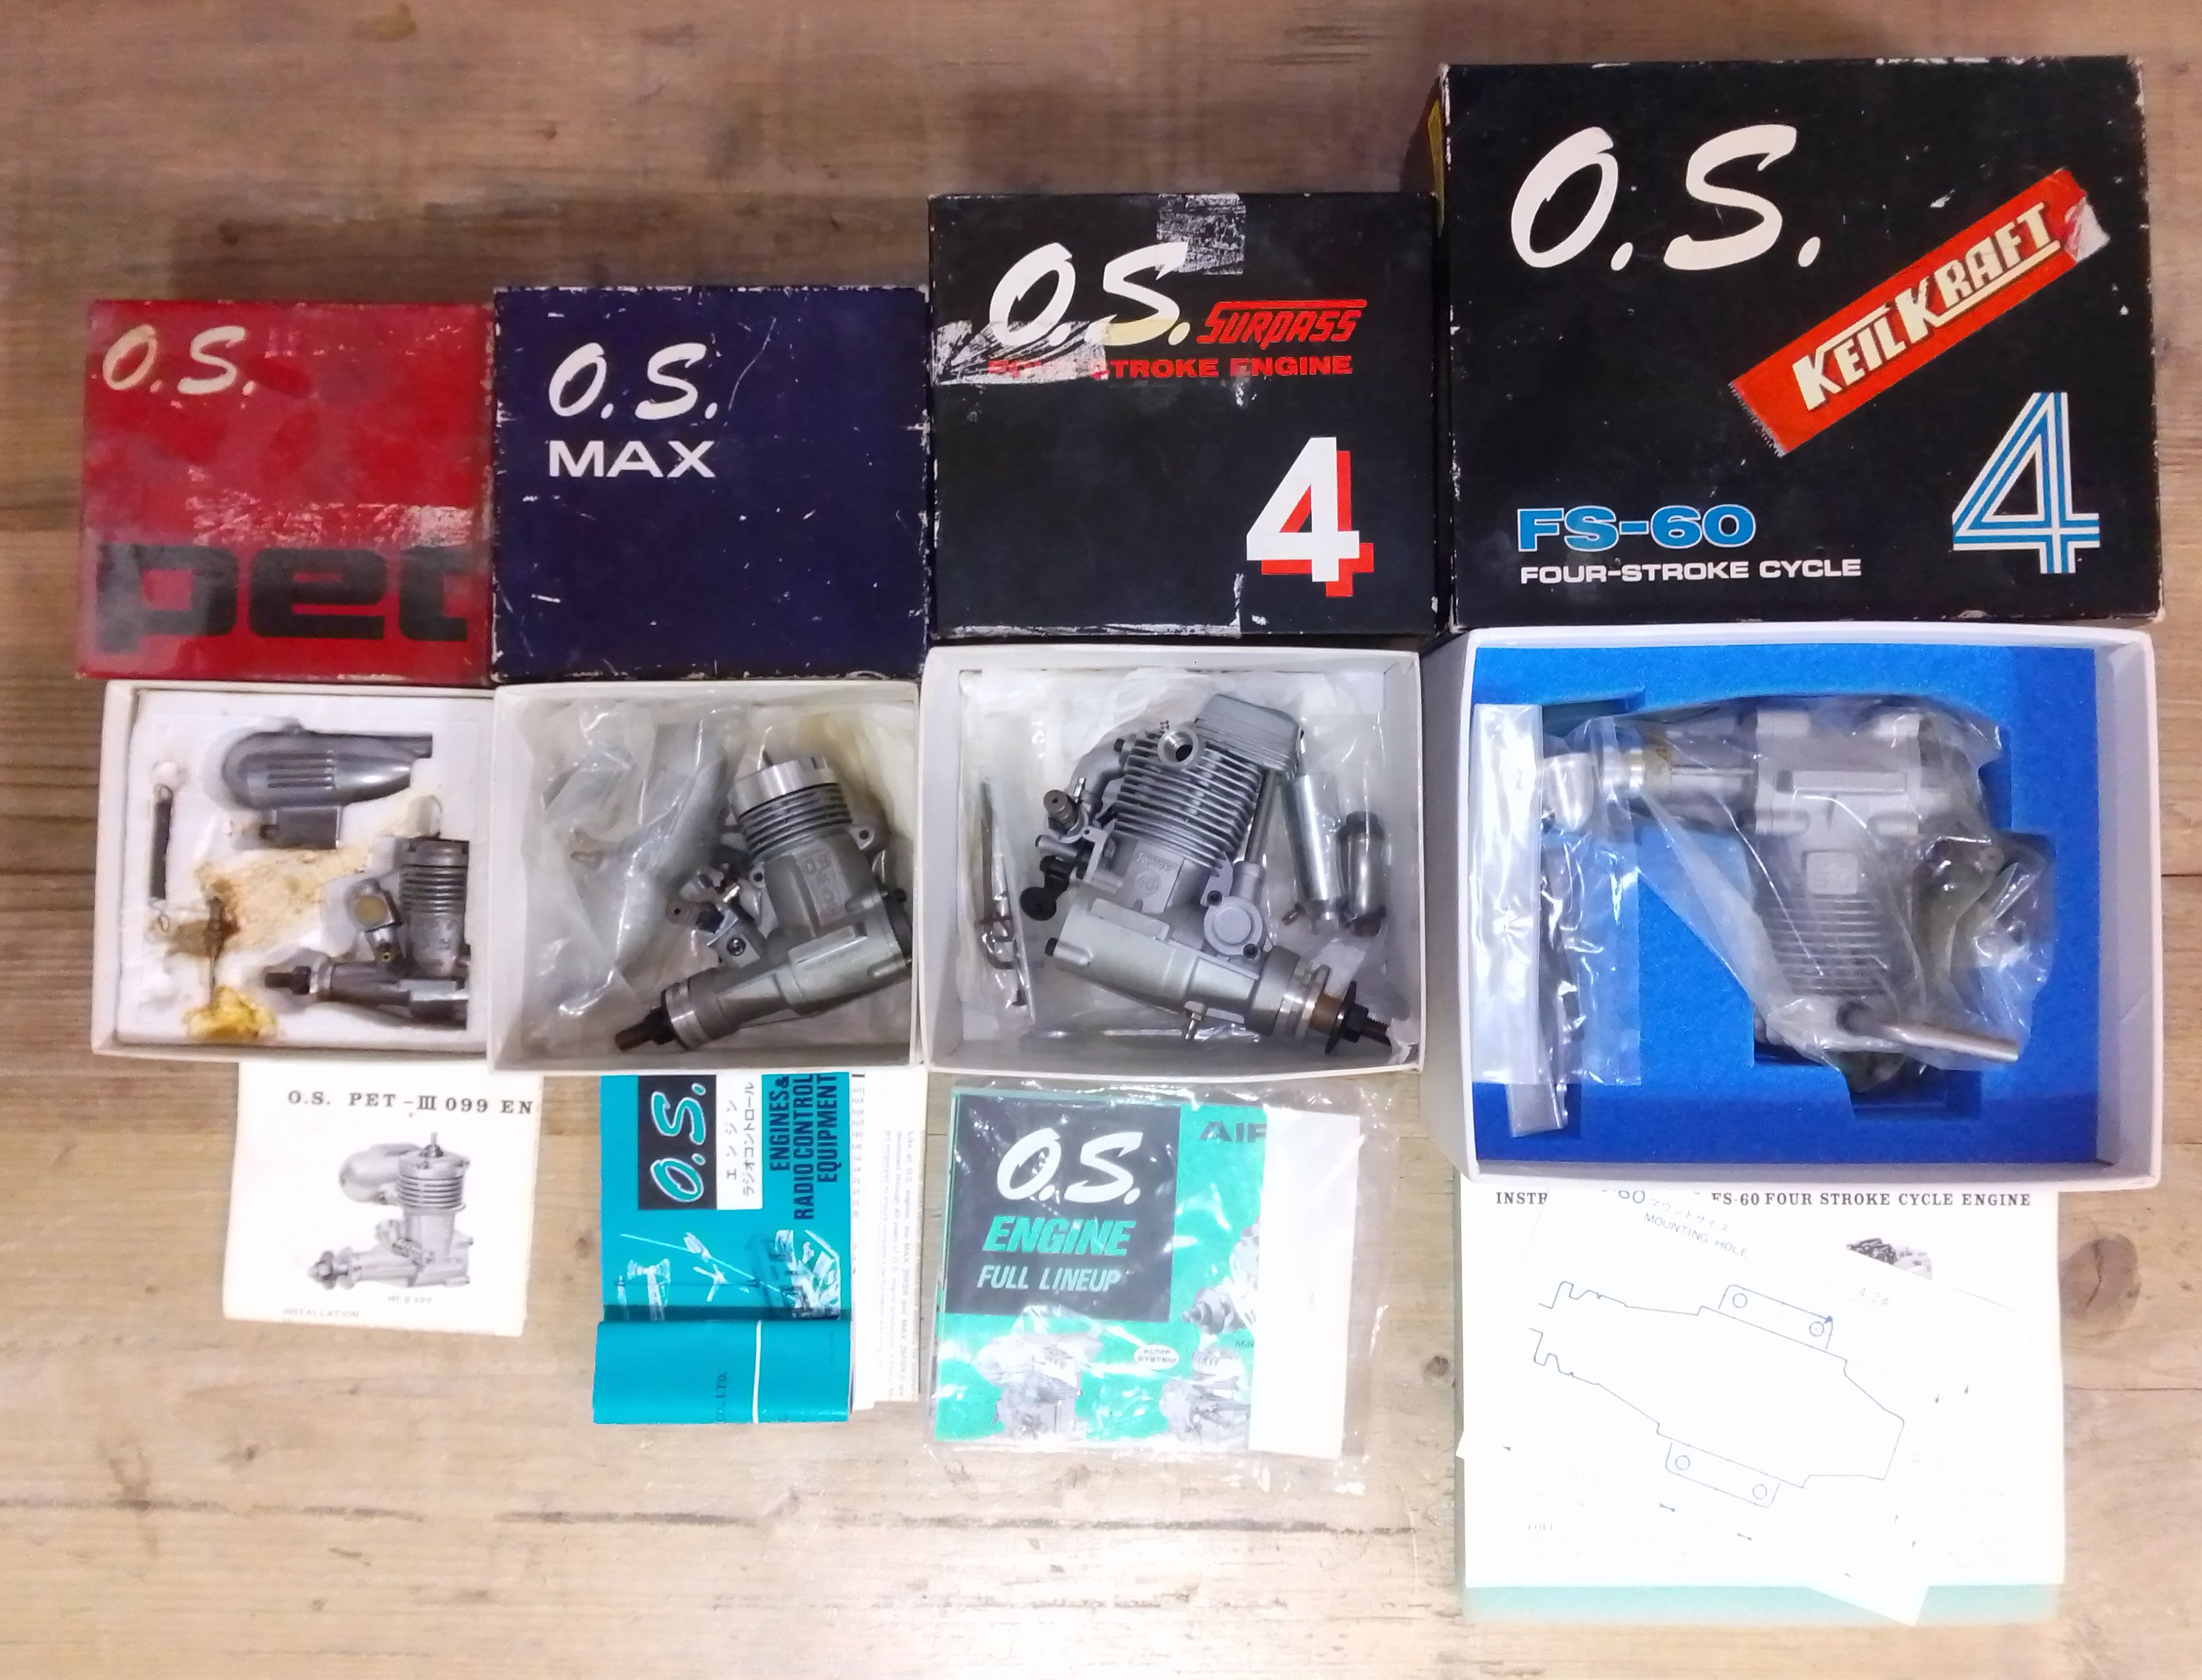 A group of four OS radio control model aeroplane engines comprising OS Pet, OS Max, OS Surpass and